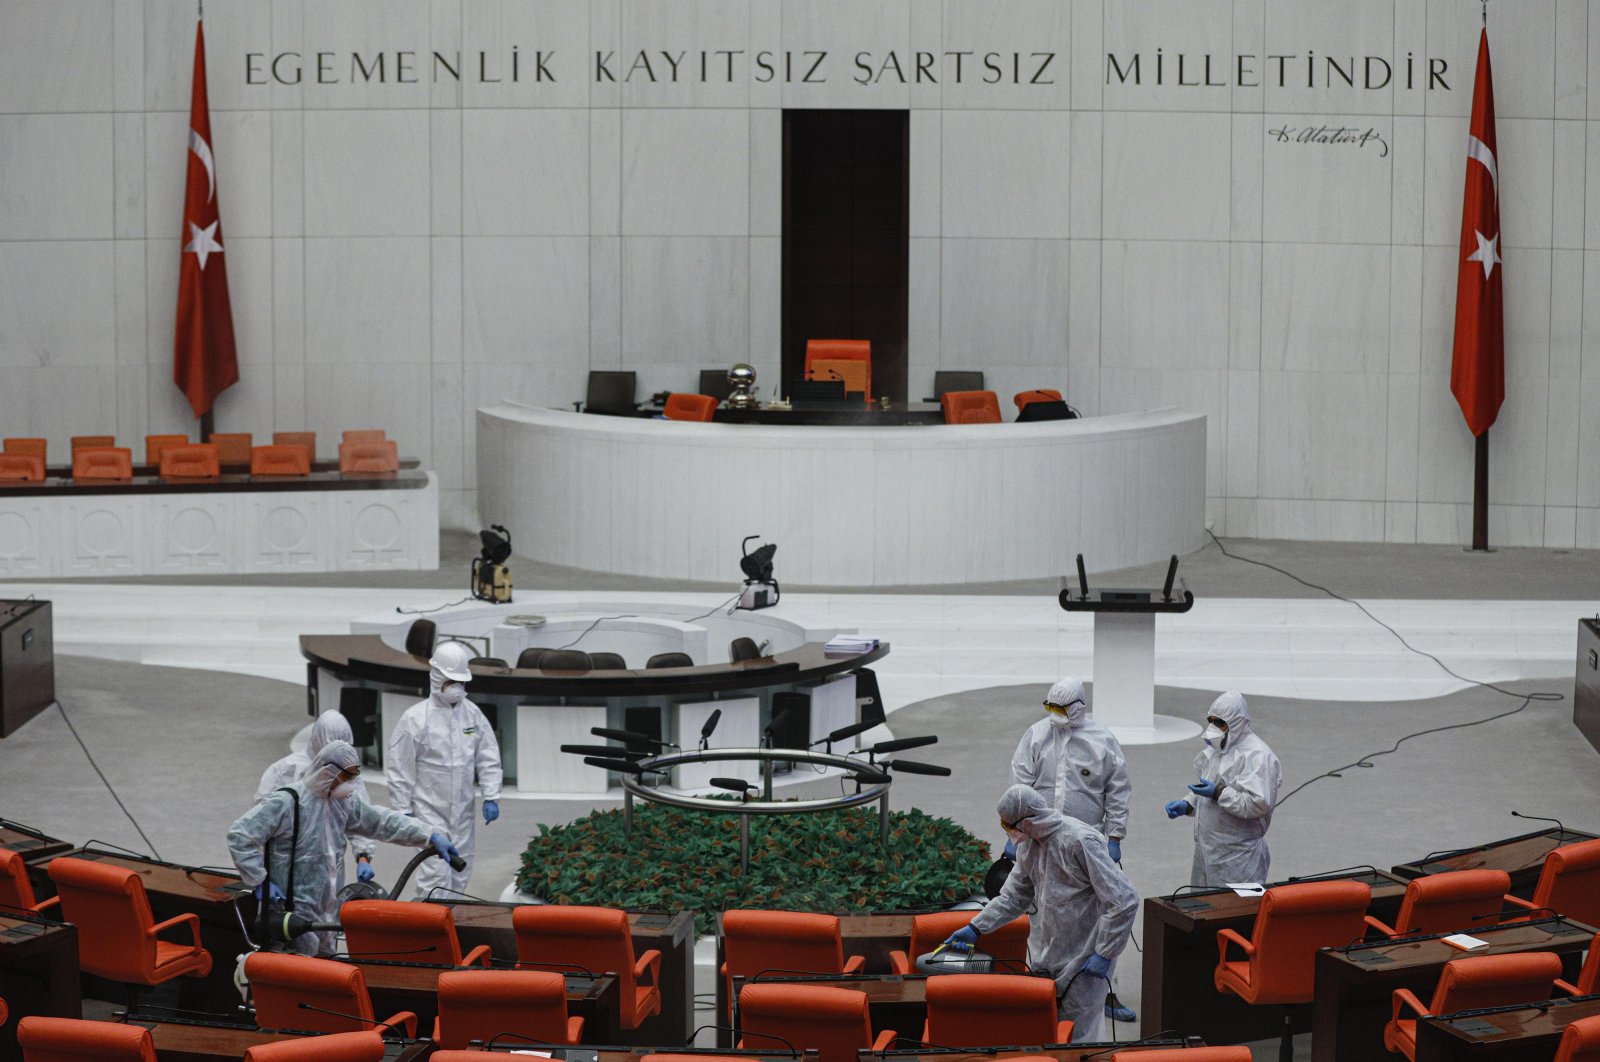 Workers disinfect the General Assembly at the Grand National Assembly of Turkey on Tuesday, March 17, 2020. (DHA Photo)